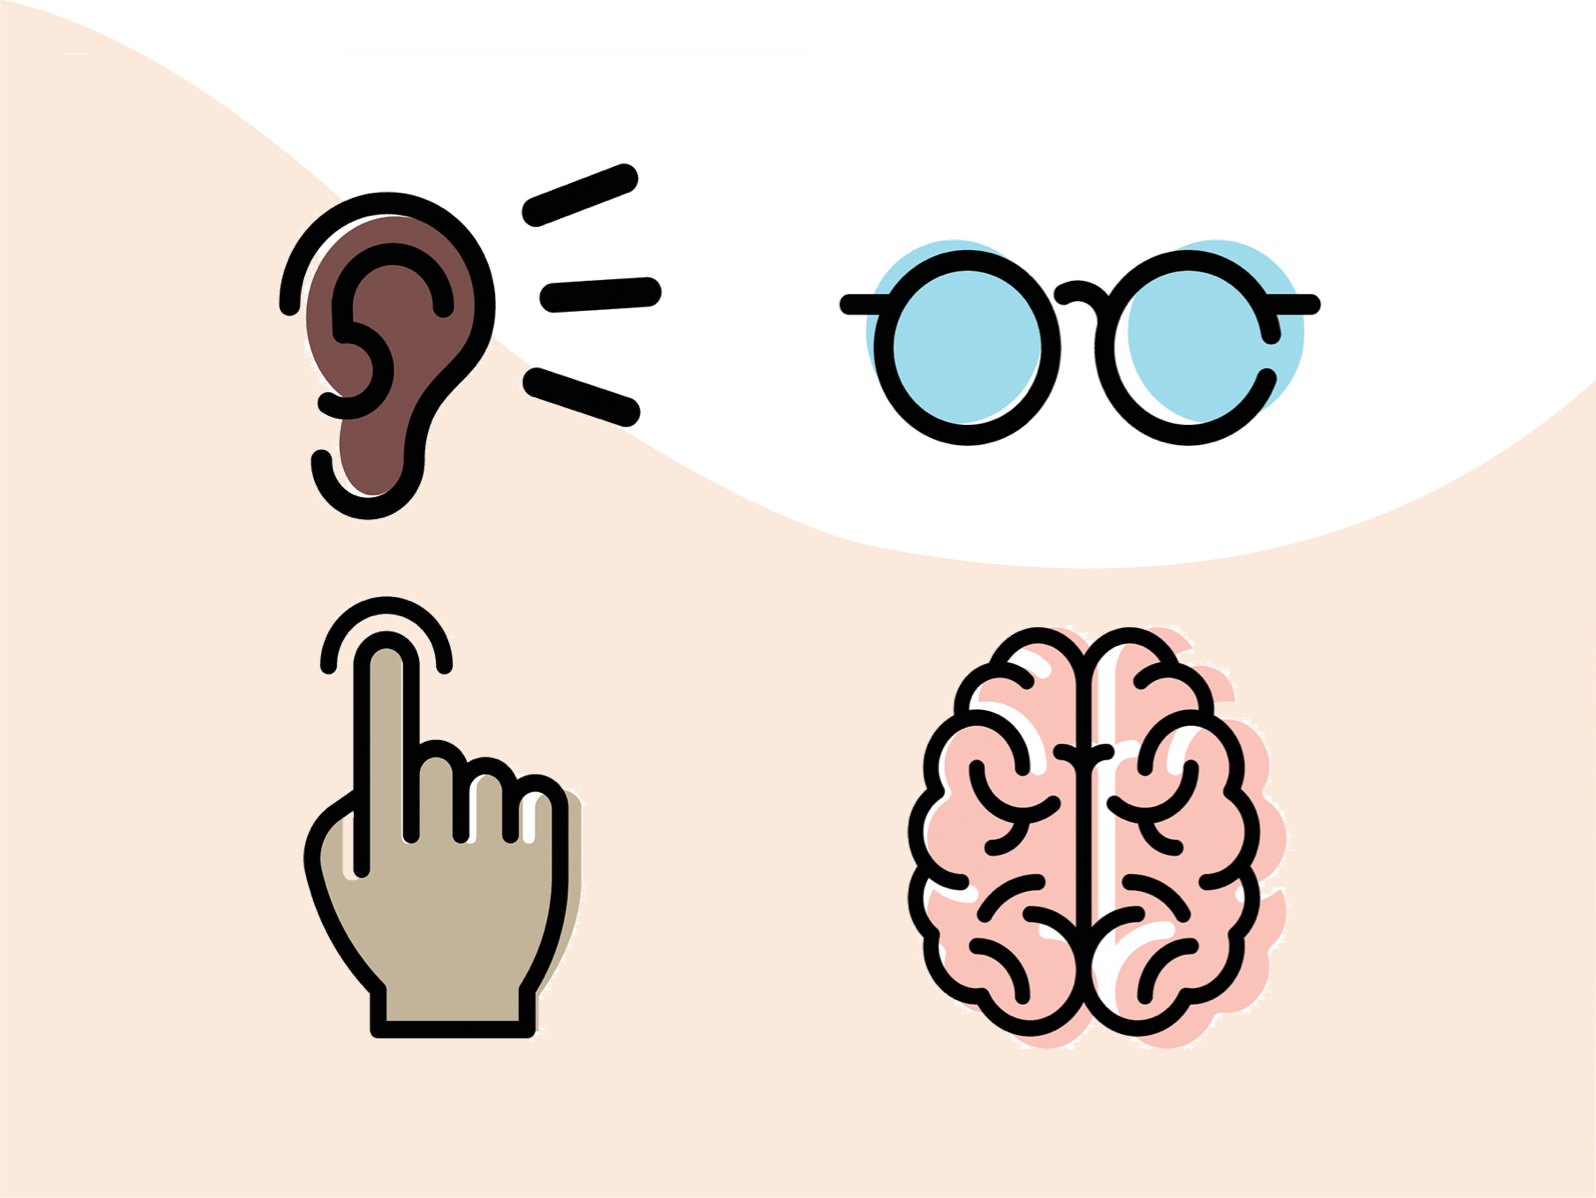 Graphic Icons Depicting Visual, Cognitive, Motor Skill and Auditory Aspects of Accessible Design